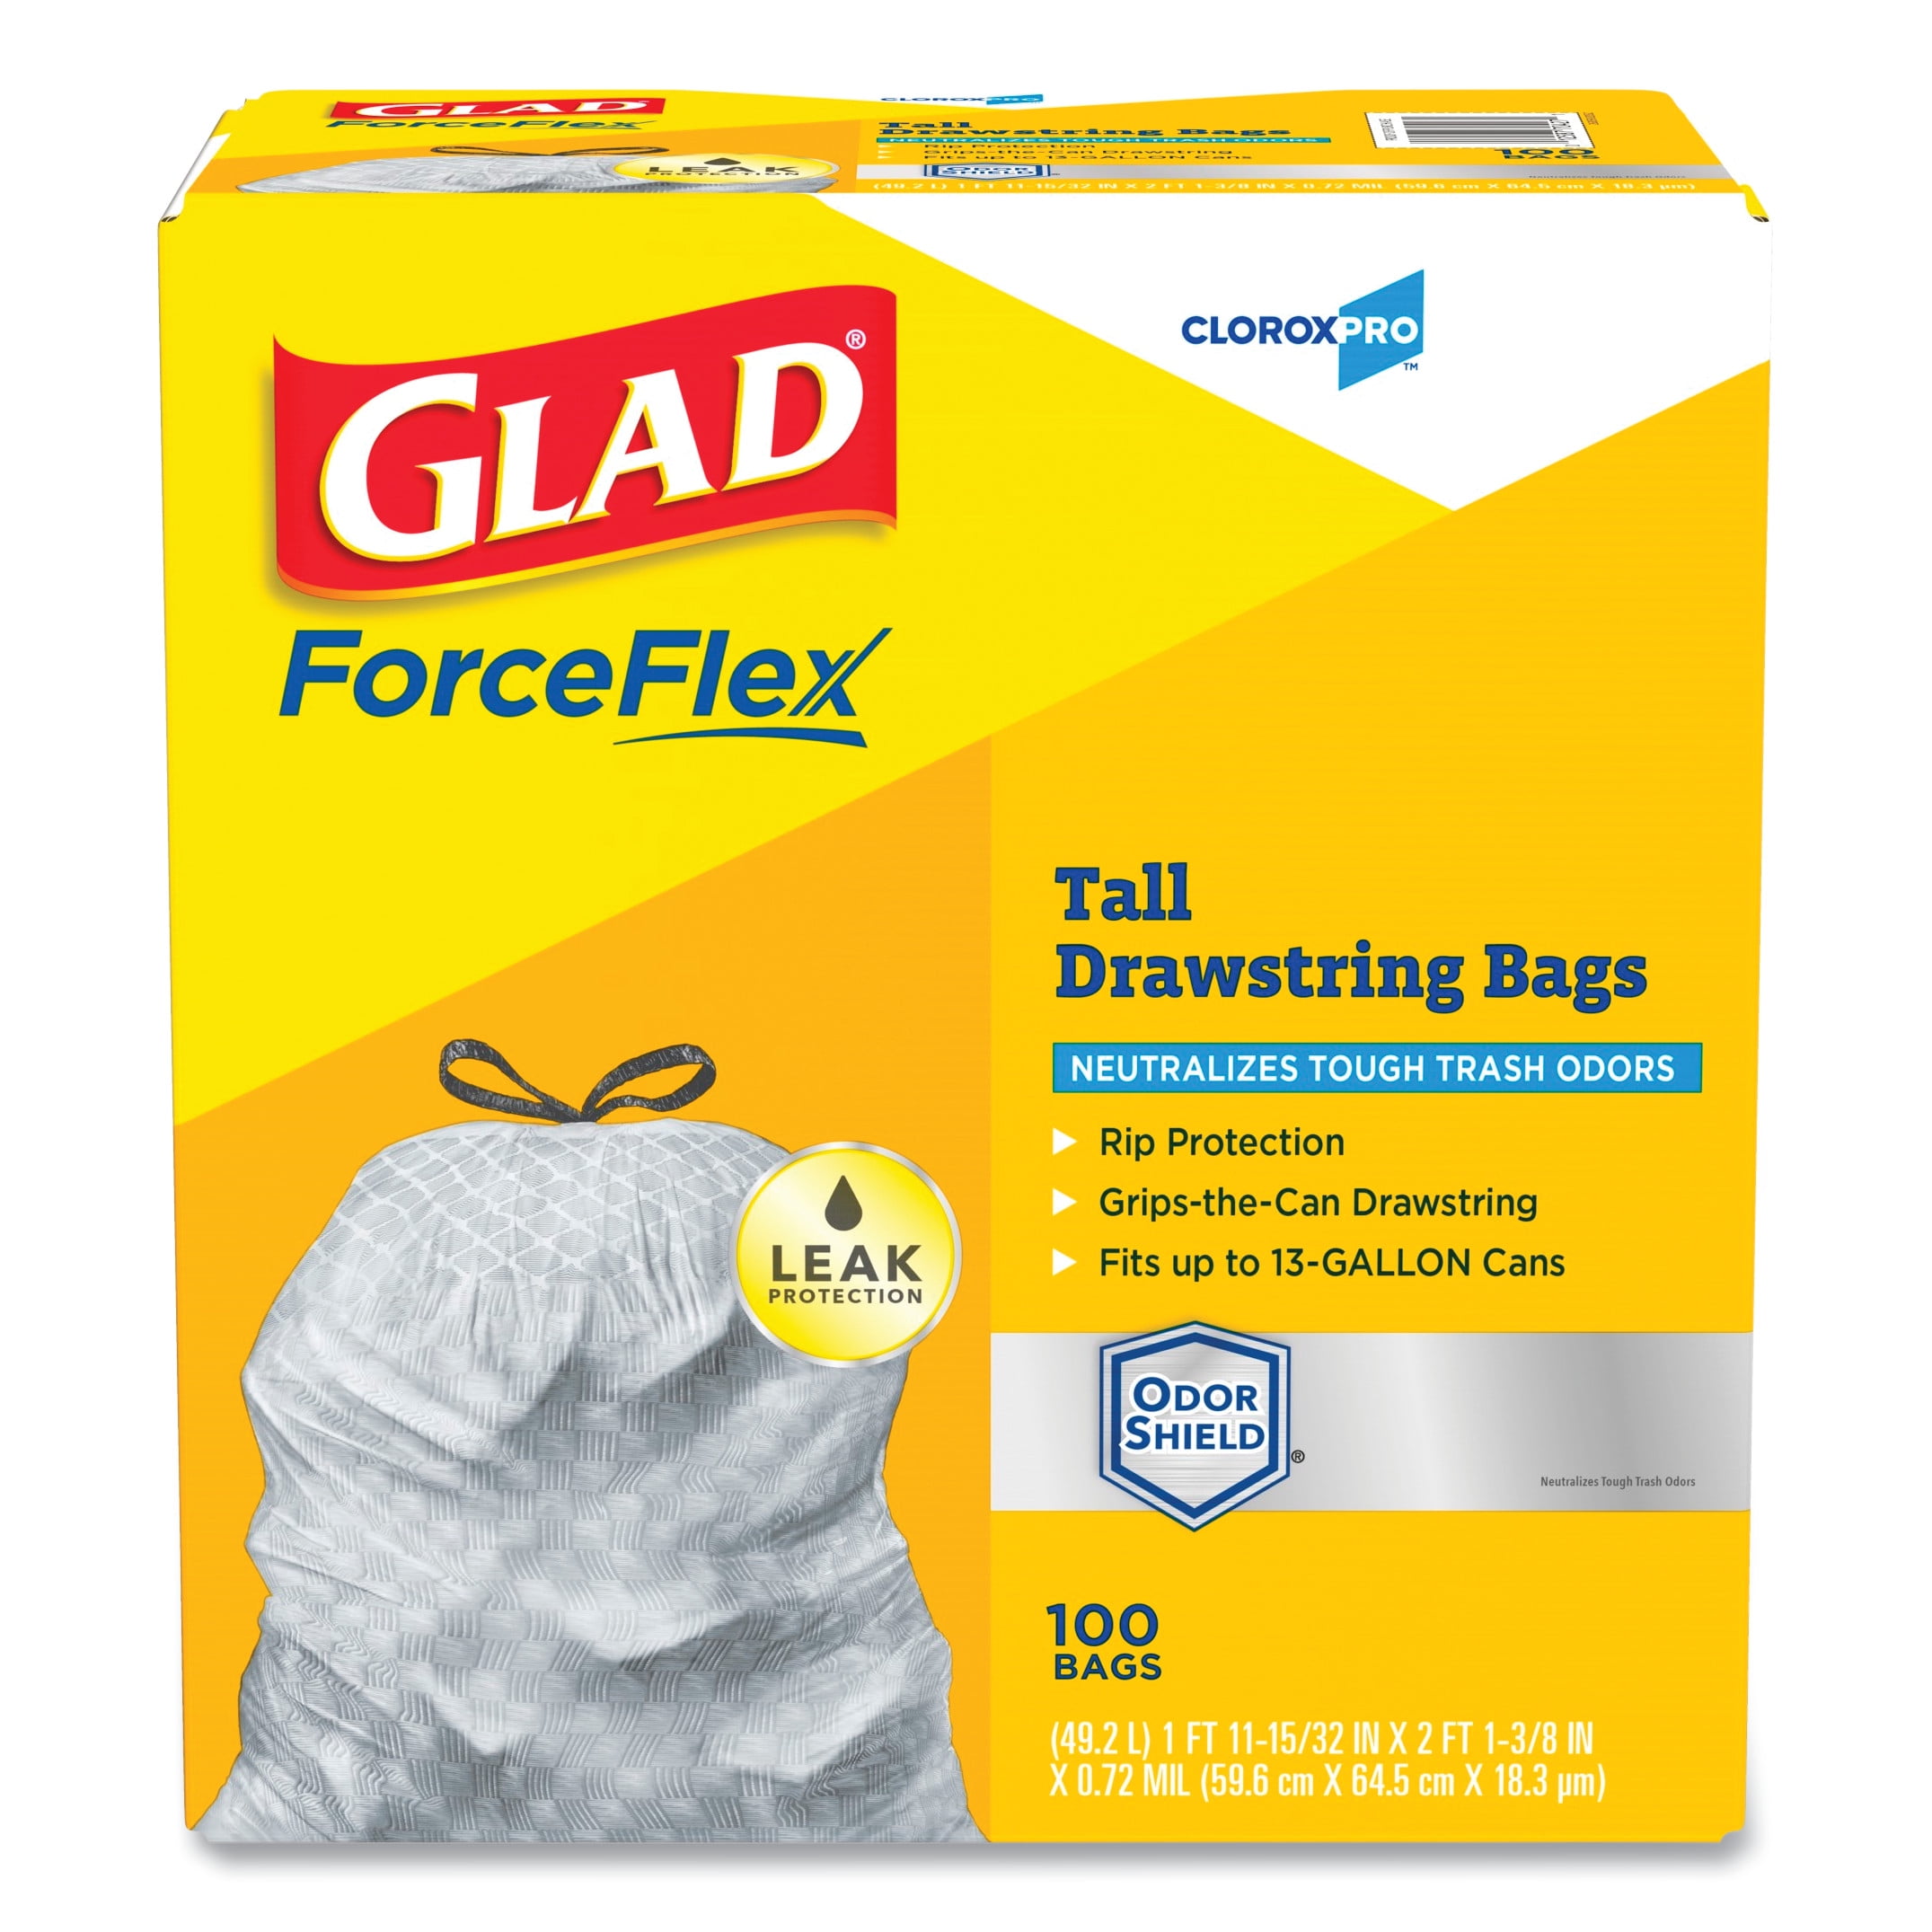 Power Flex Tall Kitchen Drawstring Trash Bags (13 Gallon, 2 Rolls of 100  ct., 200 count total) 